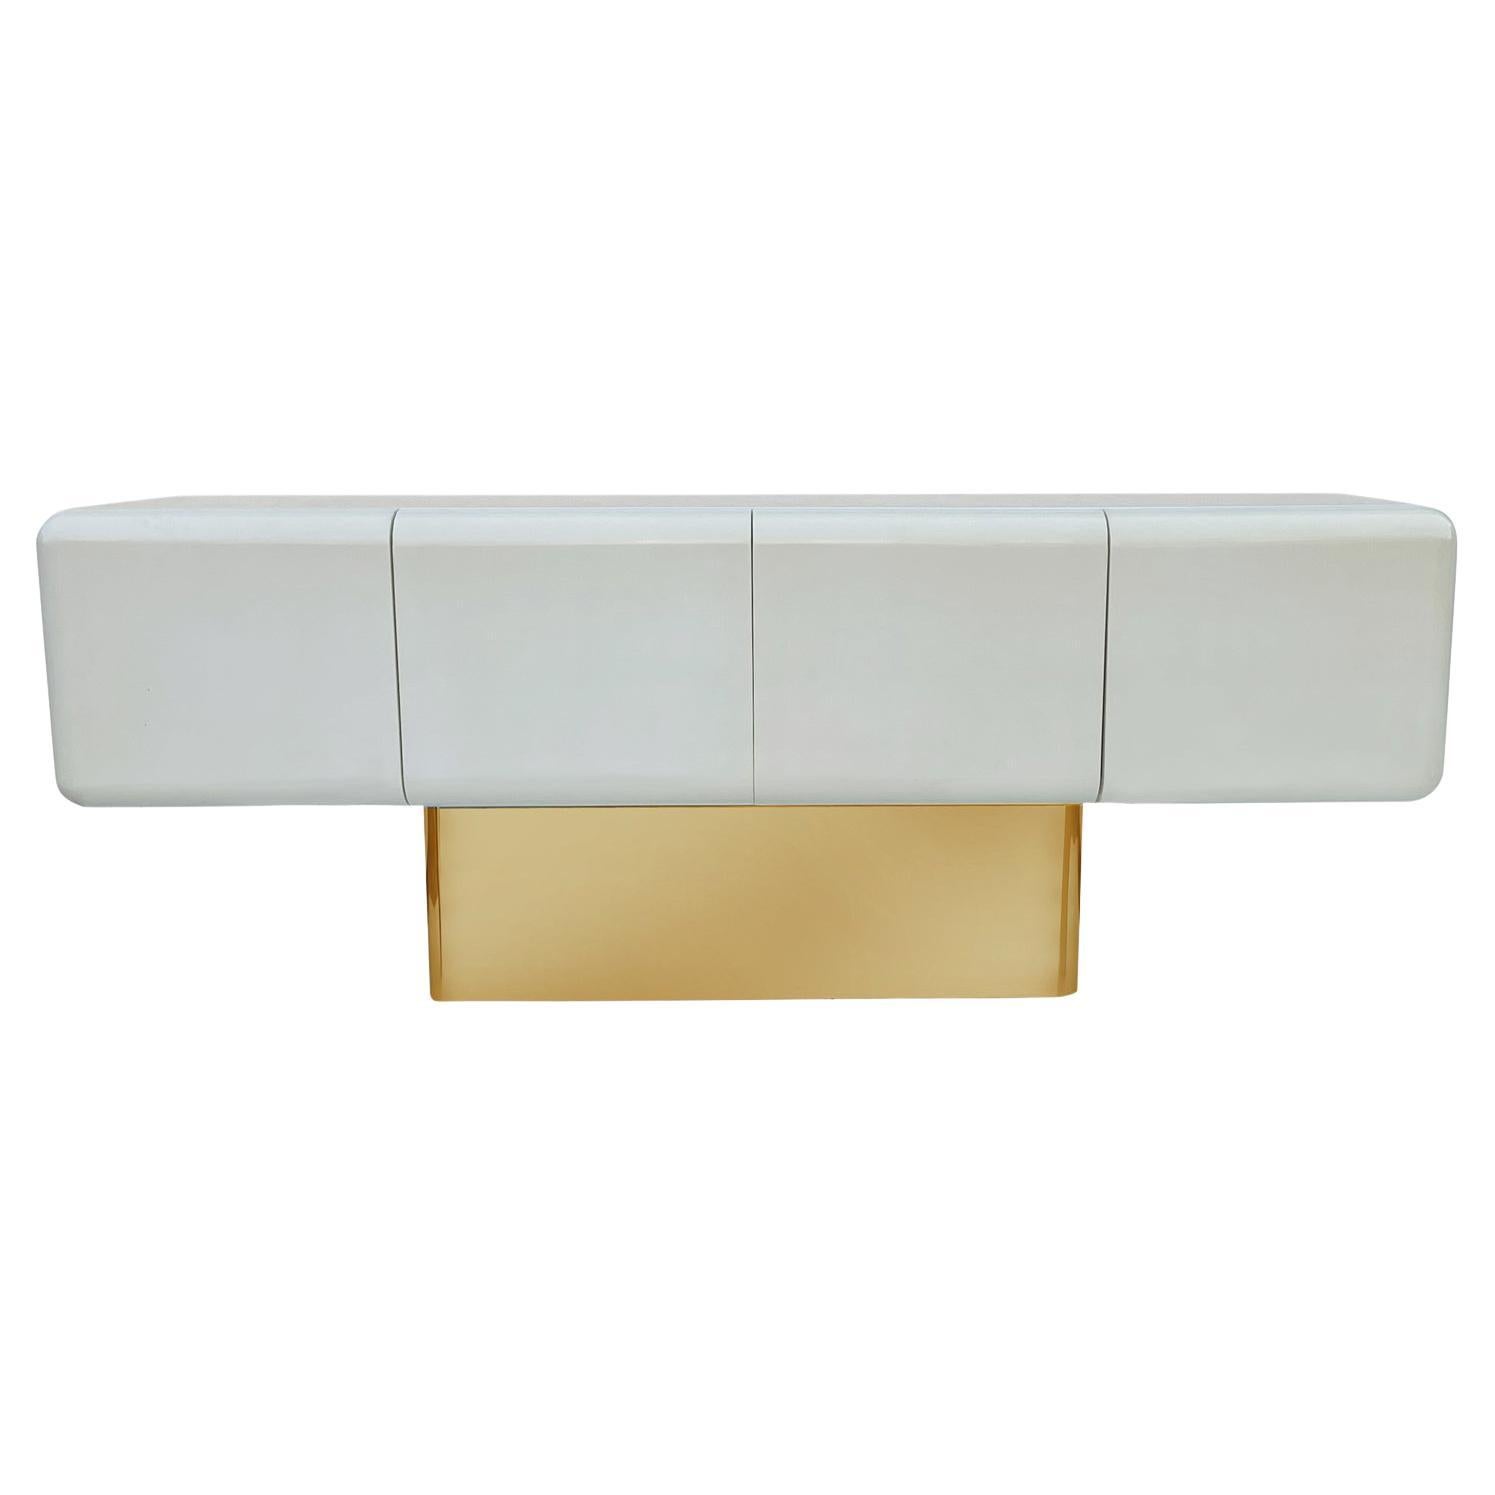 Capsule Form Mid-Century Modern off White Credenza or Sideboard on Brass Base 